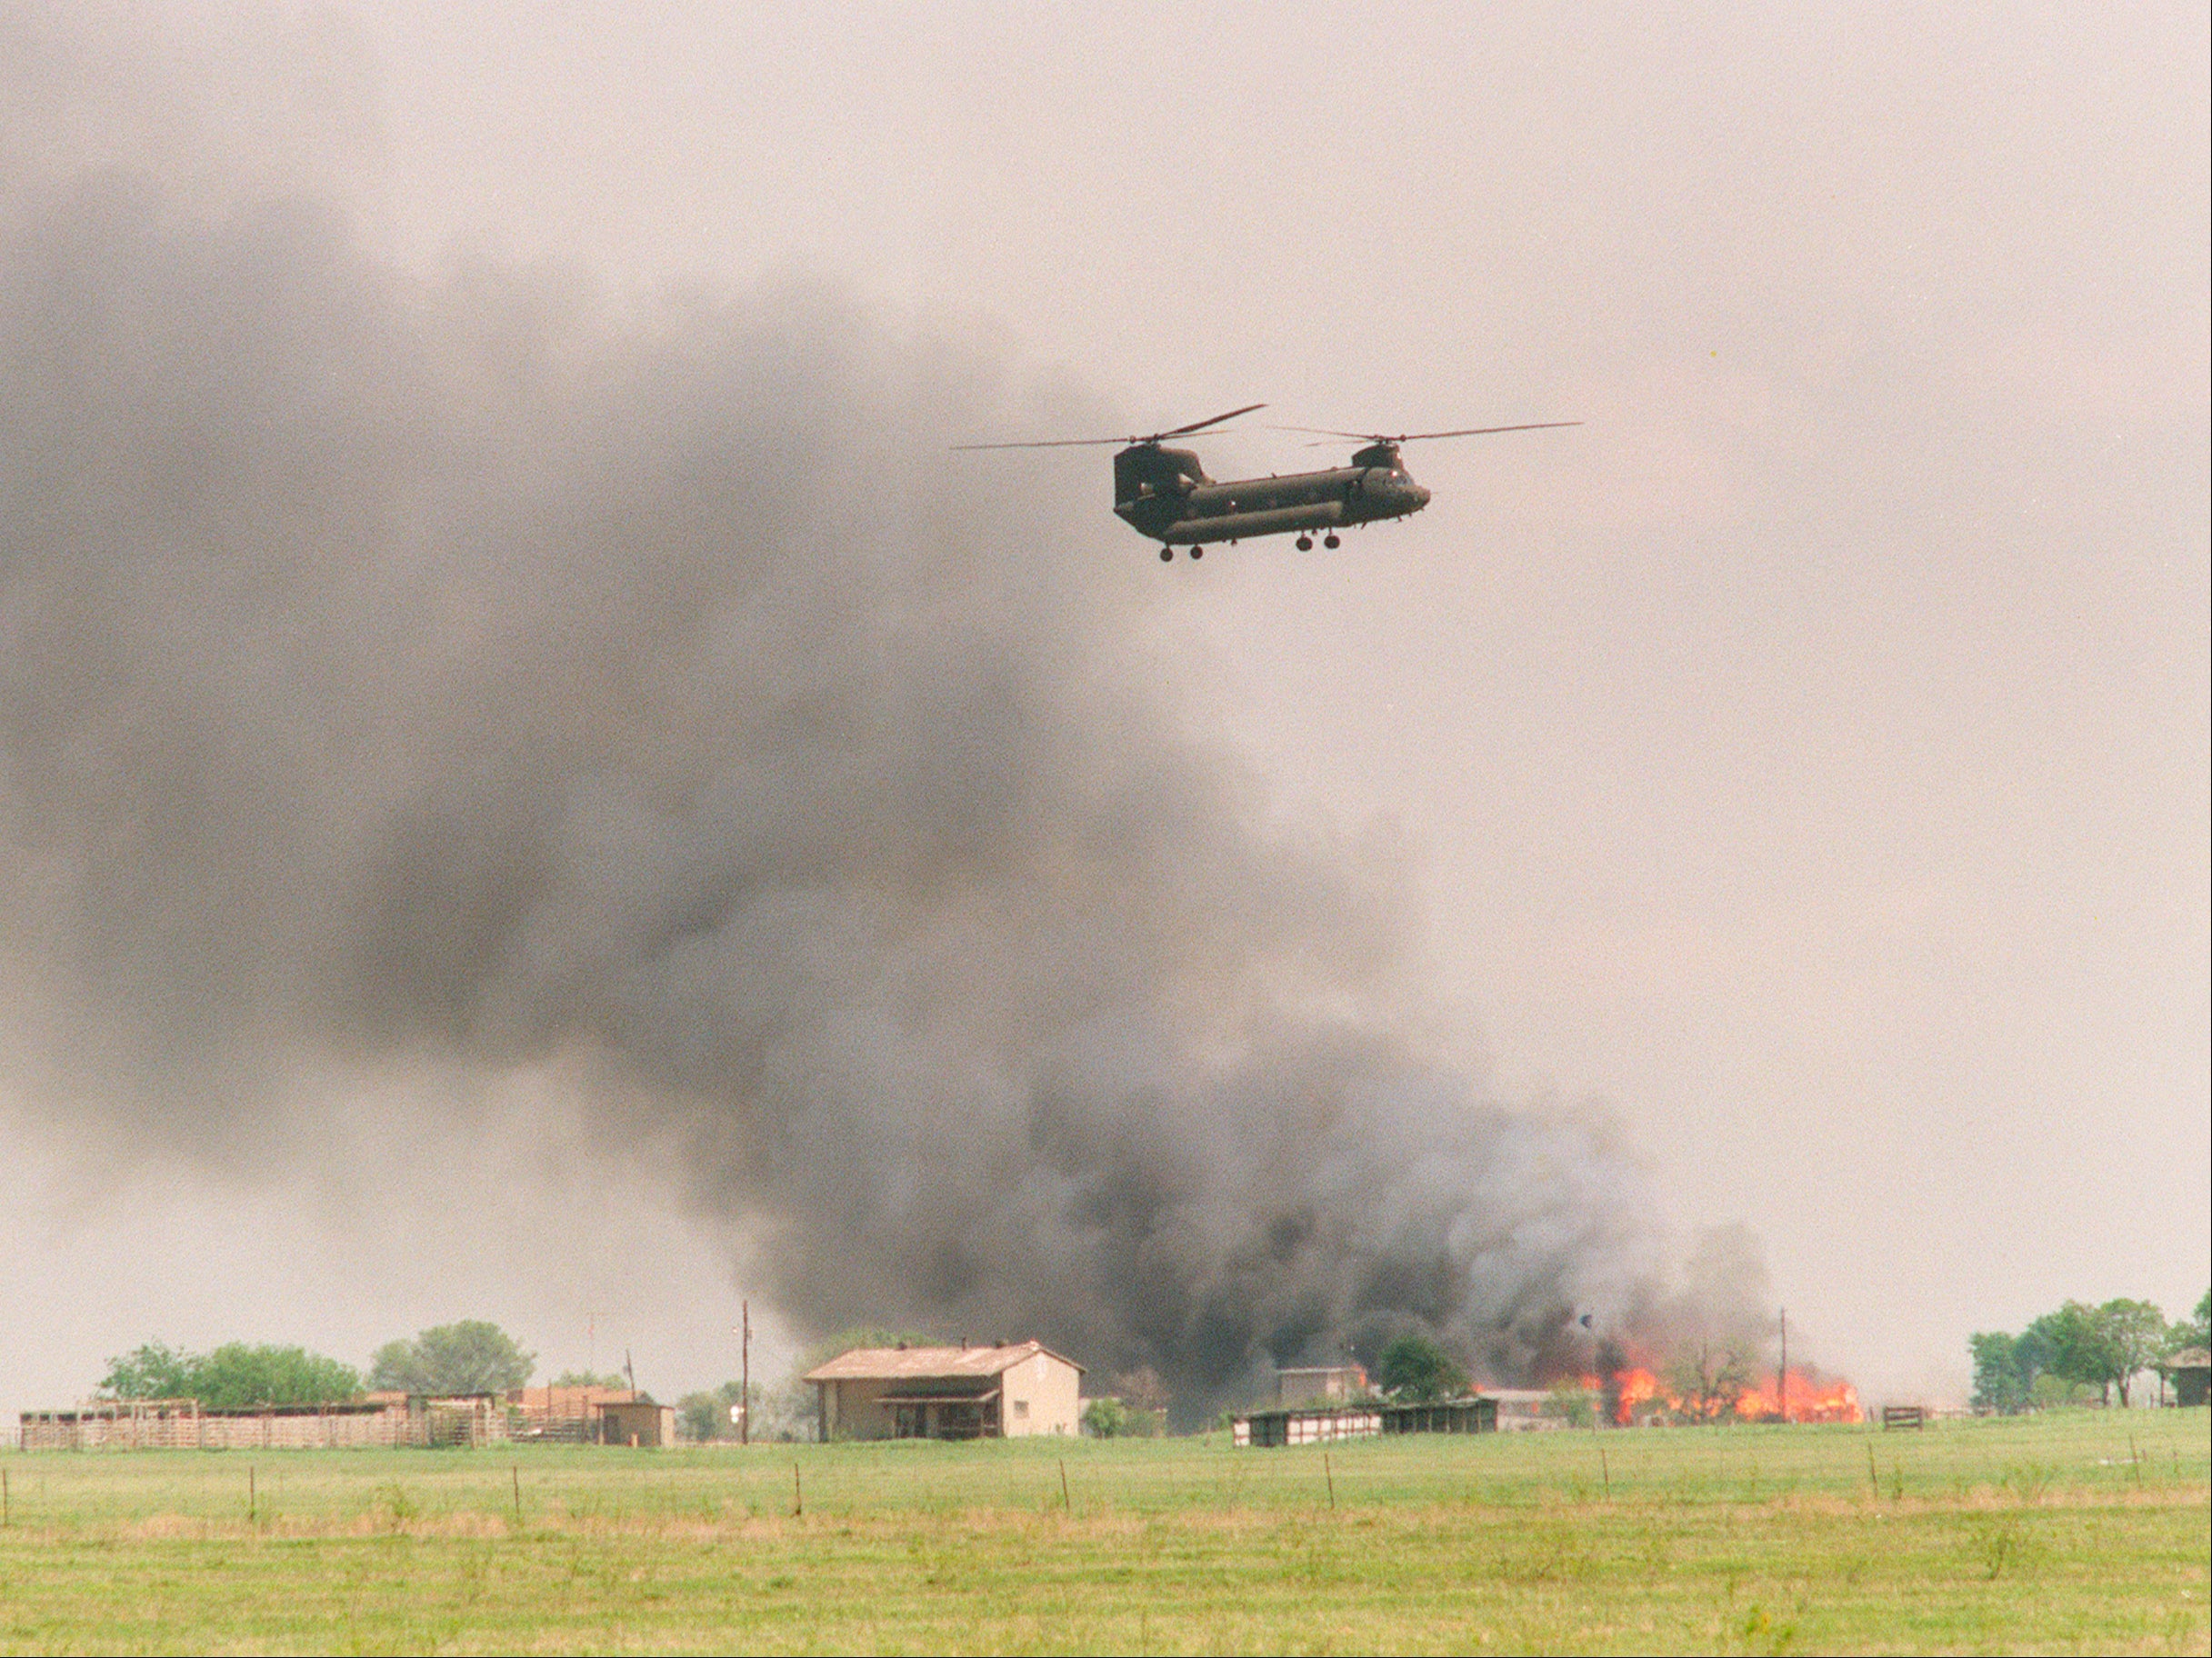 A National Guard helicopter flies past the burning Branch Davidian cult compound in Waco, Texas on 19 April 1993